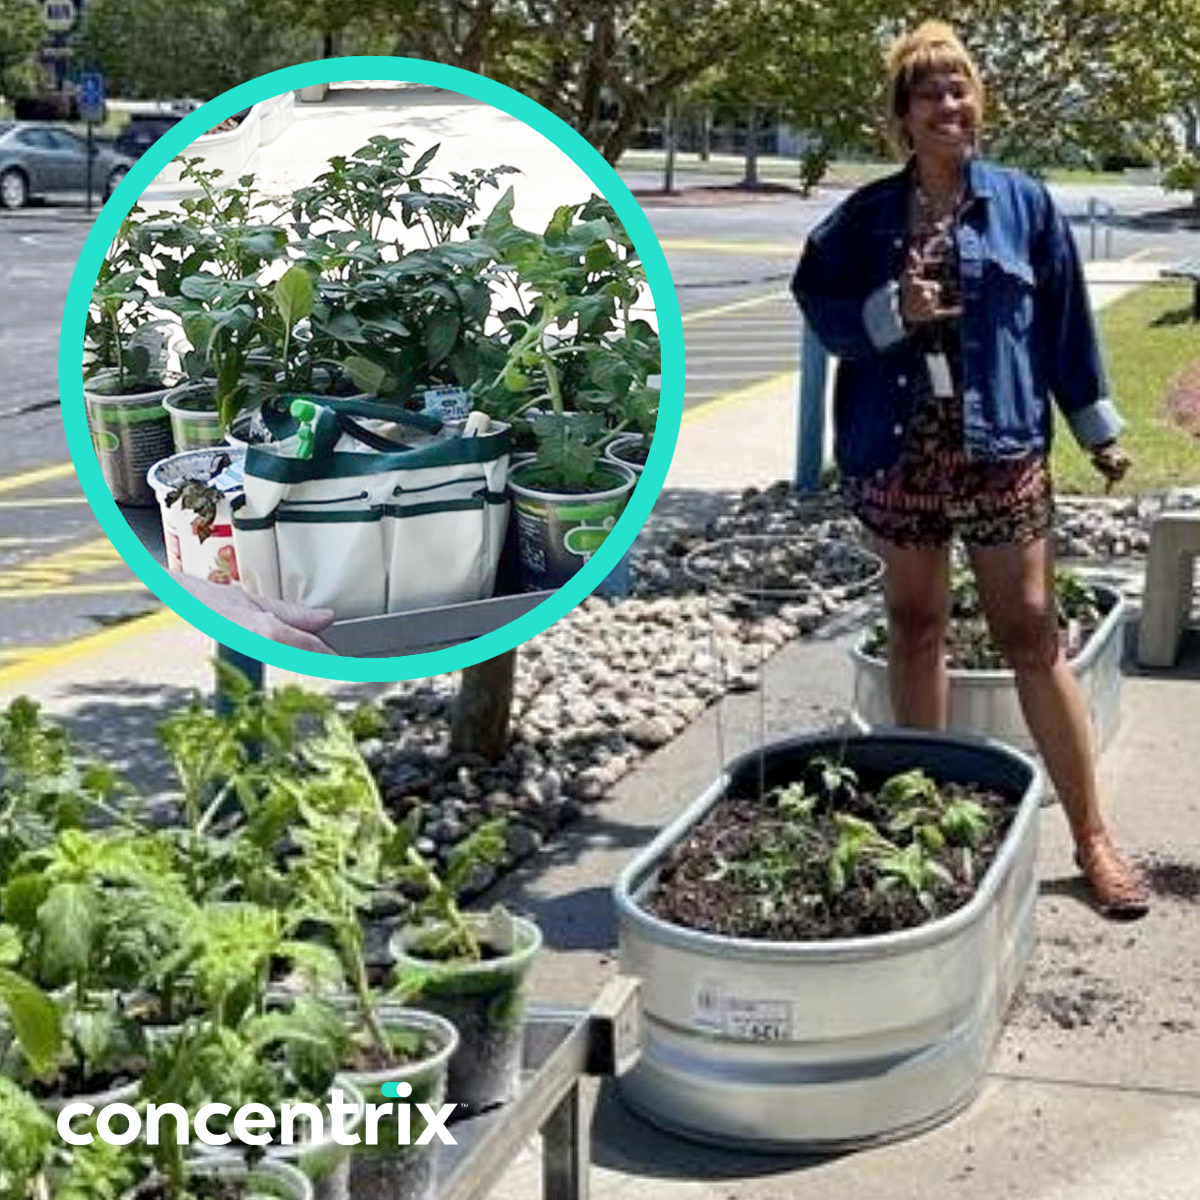 Concentrix game-changer, Lanea Kay A., out of Jacksonville, NC, had an idea to create a Community Garden for her site...and it came to fruition! Today, game-changers are tending to the garden to soon be harvested in order to make the produce available for fellow game-changers.